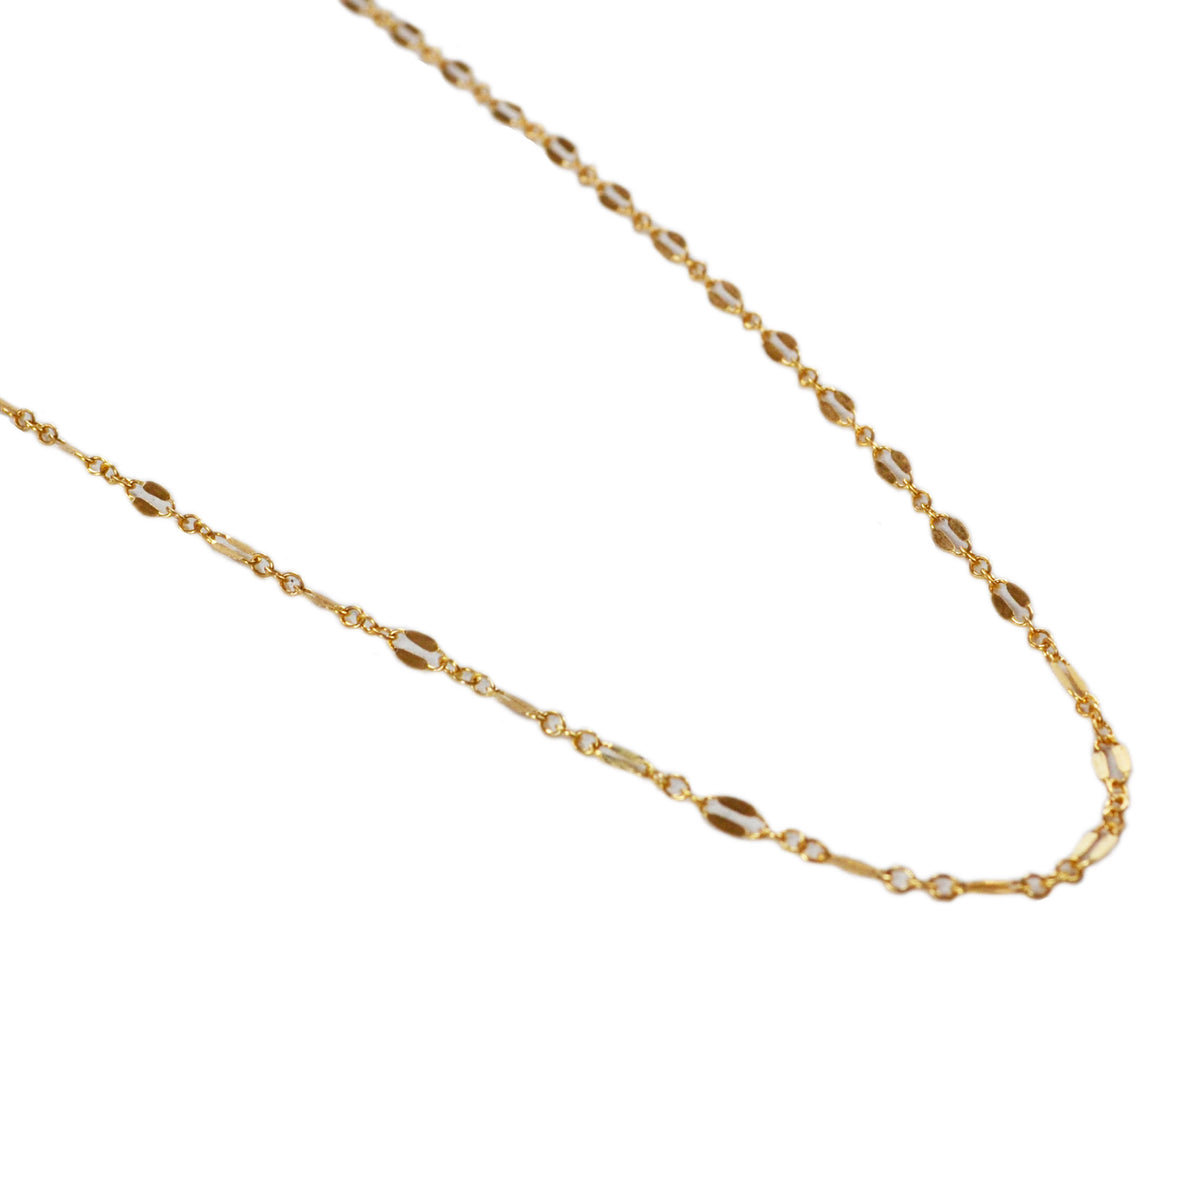 Shimmer Chain Necklace, Gold, Rose Gold, or Silver